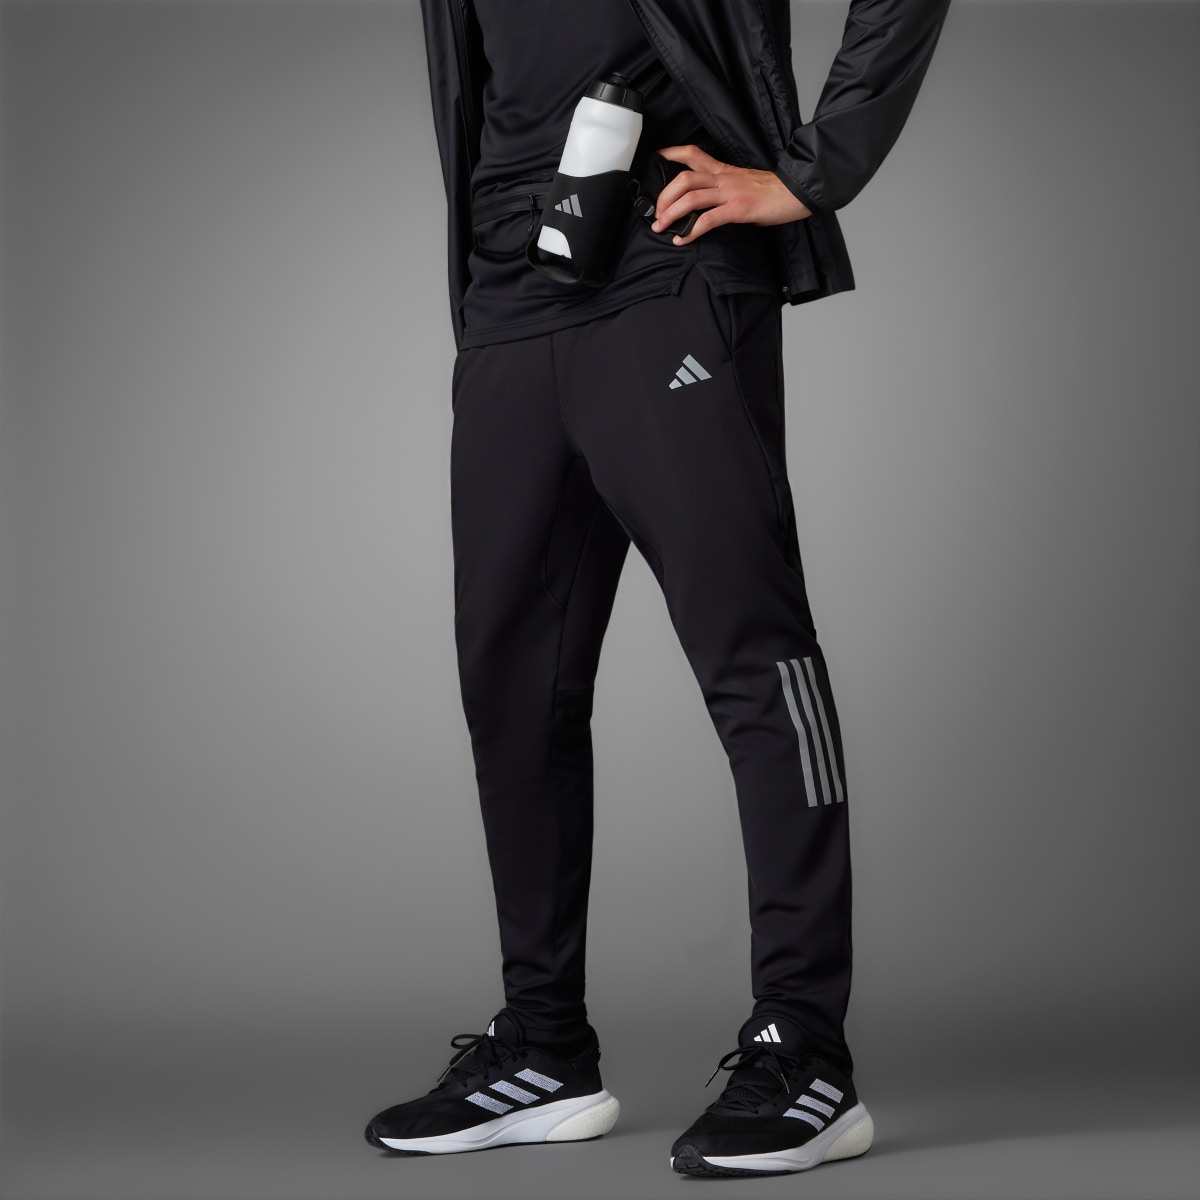 Adidas Own the Run Astro Knit Pants. 6